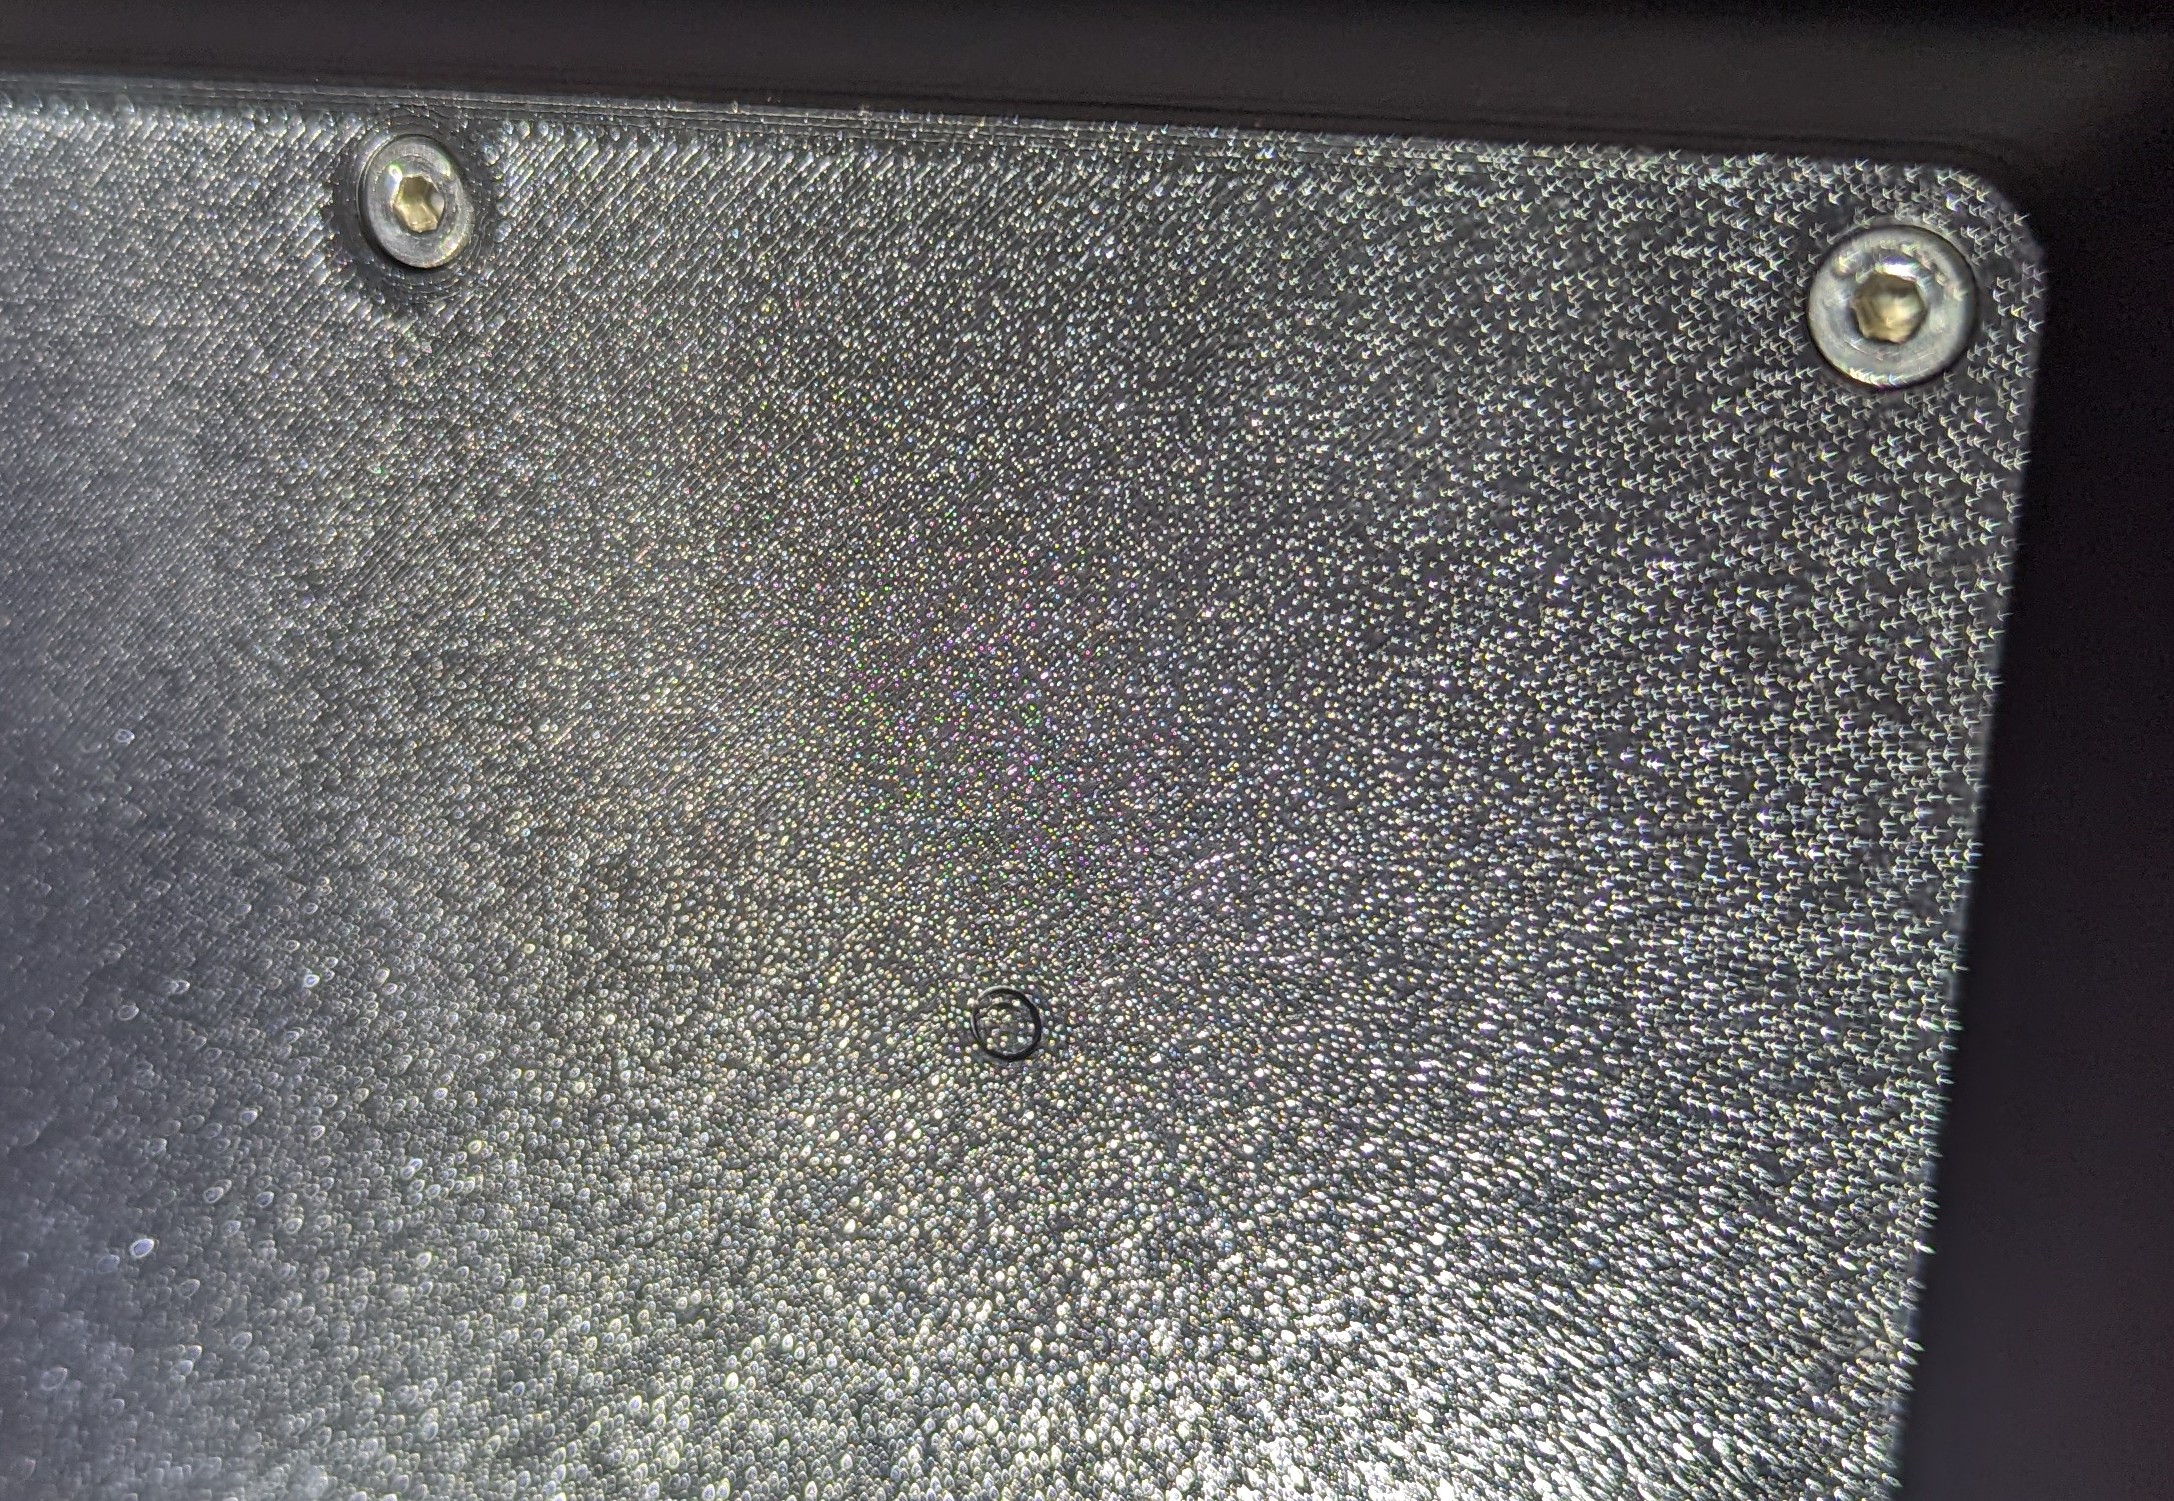 Picture showing close up of subwoofer panel; the hole meant for VESA mounting is almost invisible as it's full of support material.